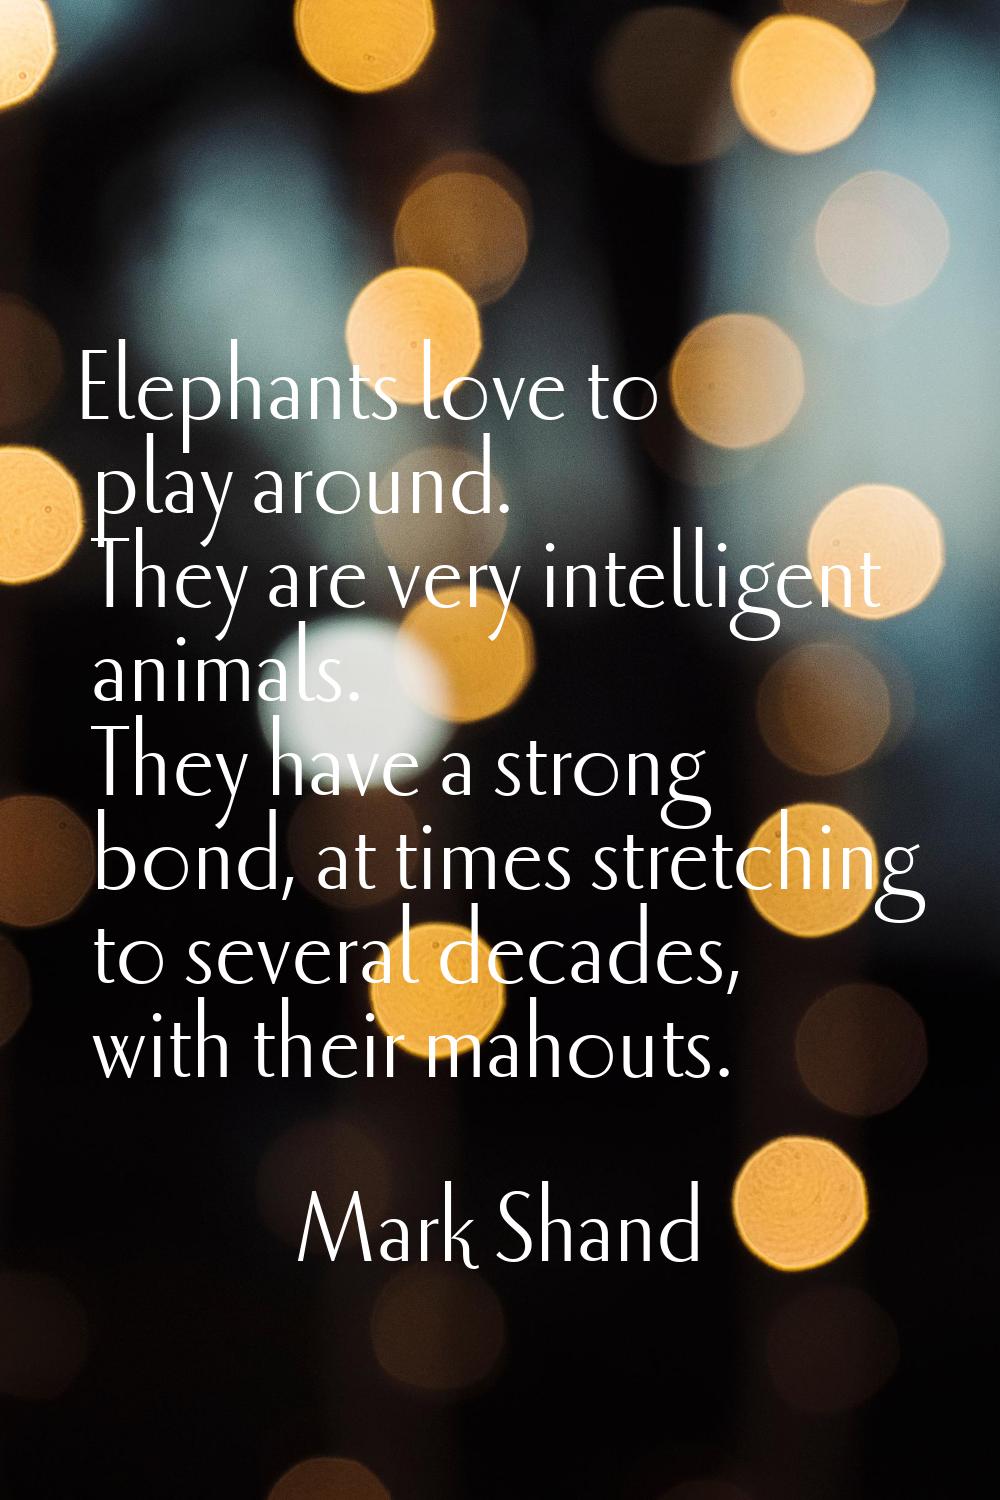 Elephants love to play around. They are very intelligent animals. They have a strong bond, at times